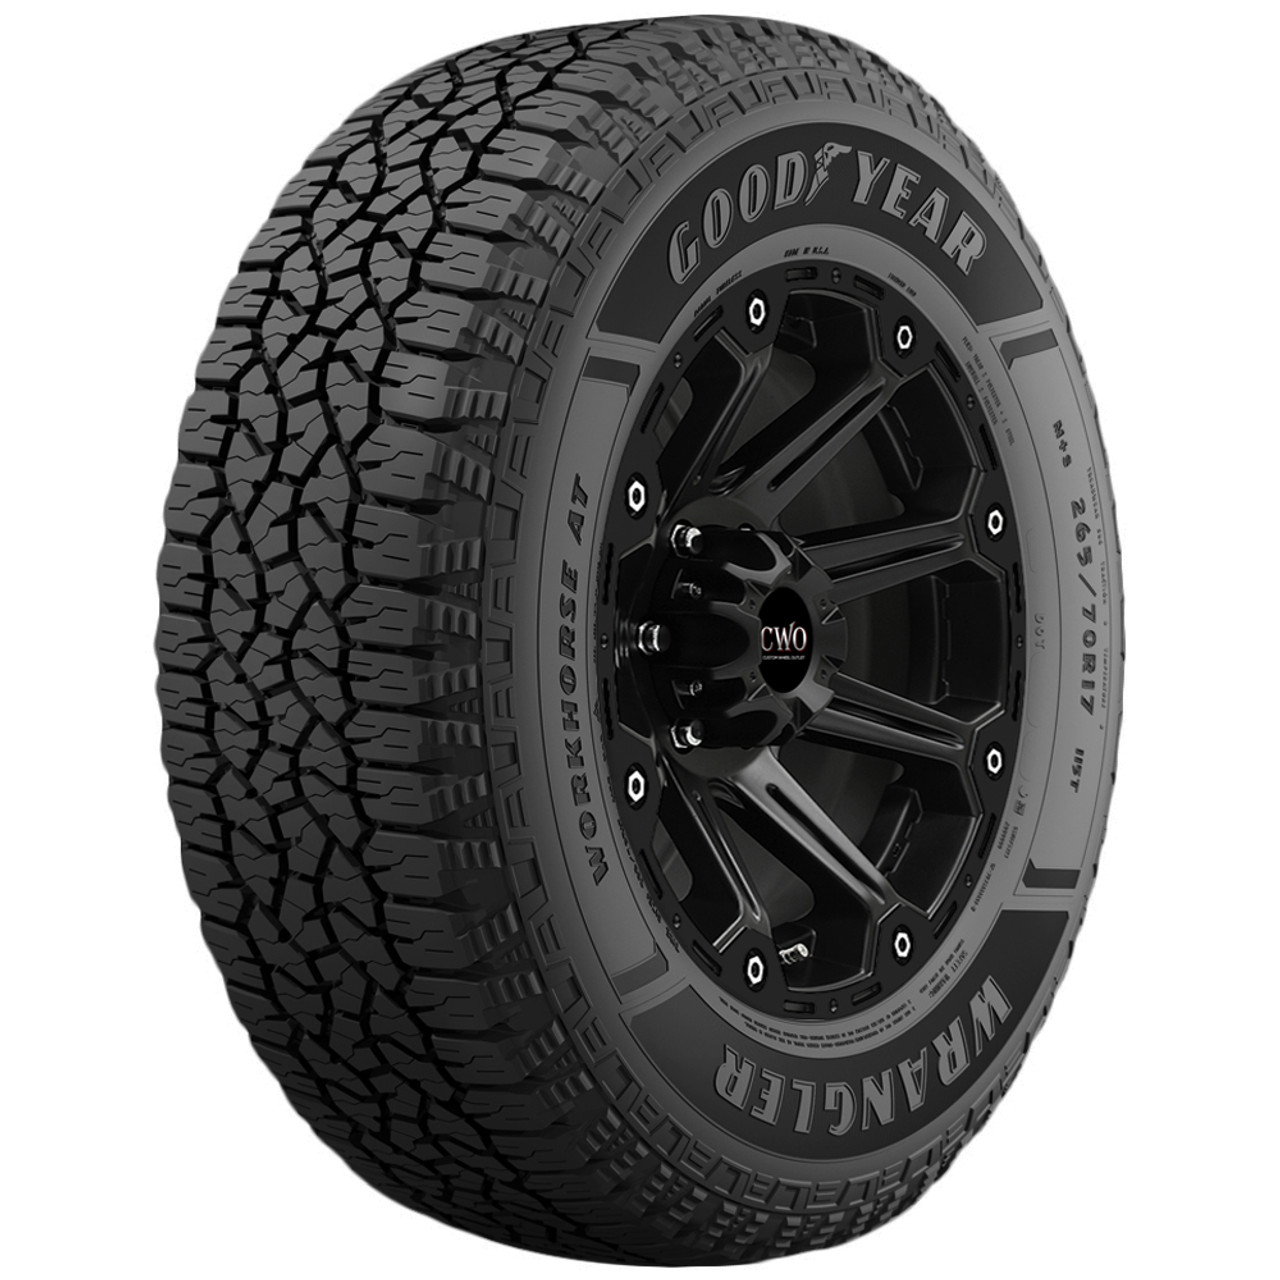 265/70R17 Goodyear Wrangler Workhorse AT 115T SL/4 Ply White Letter Tire  480042856 - ShopCWO